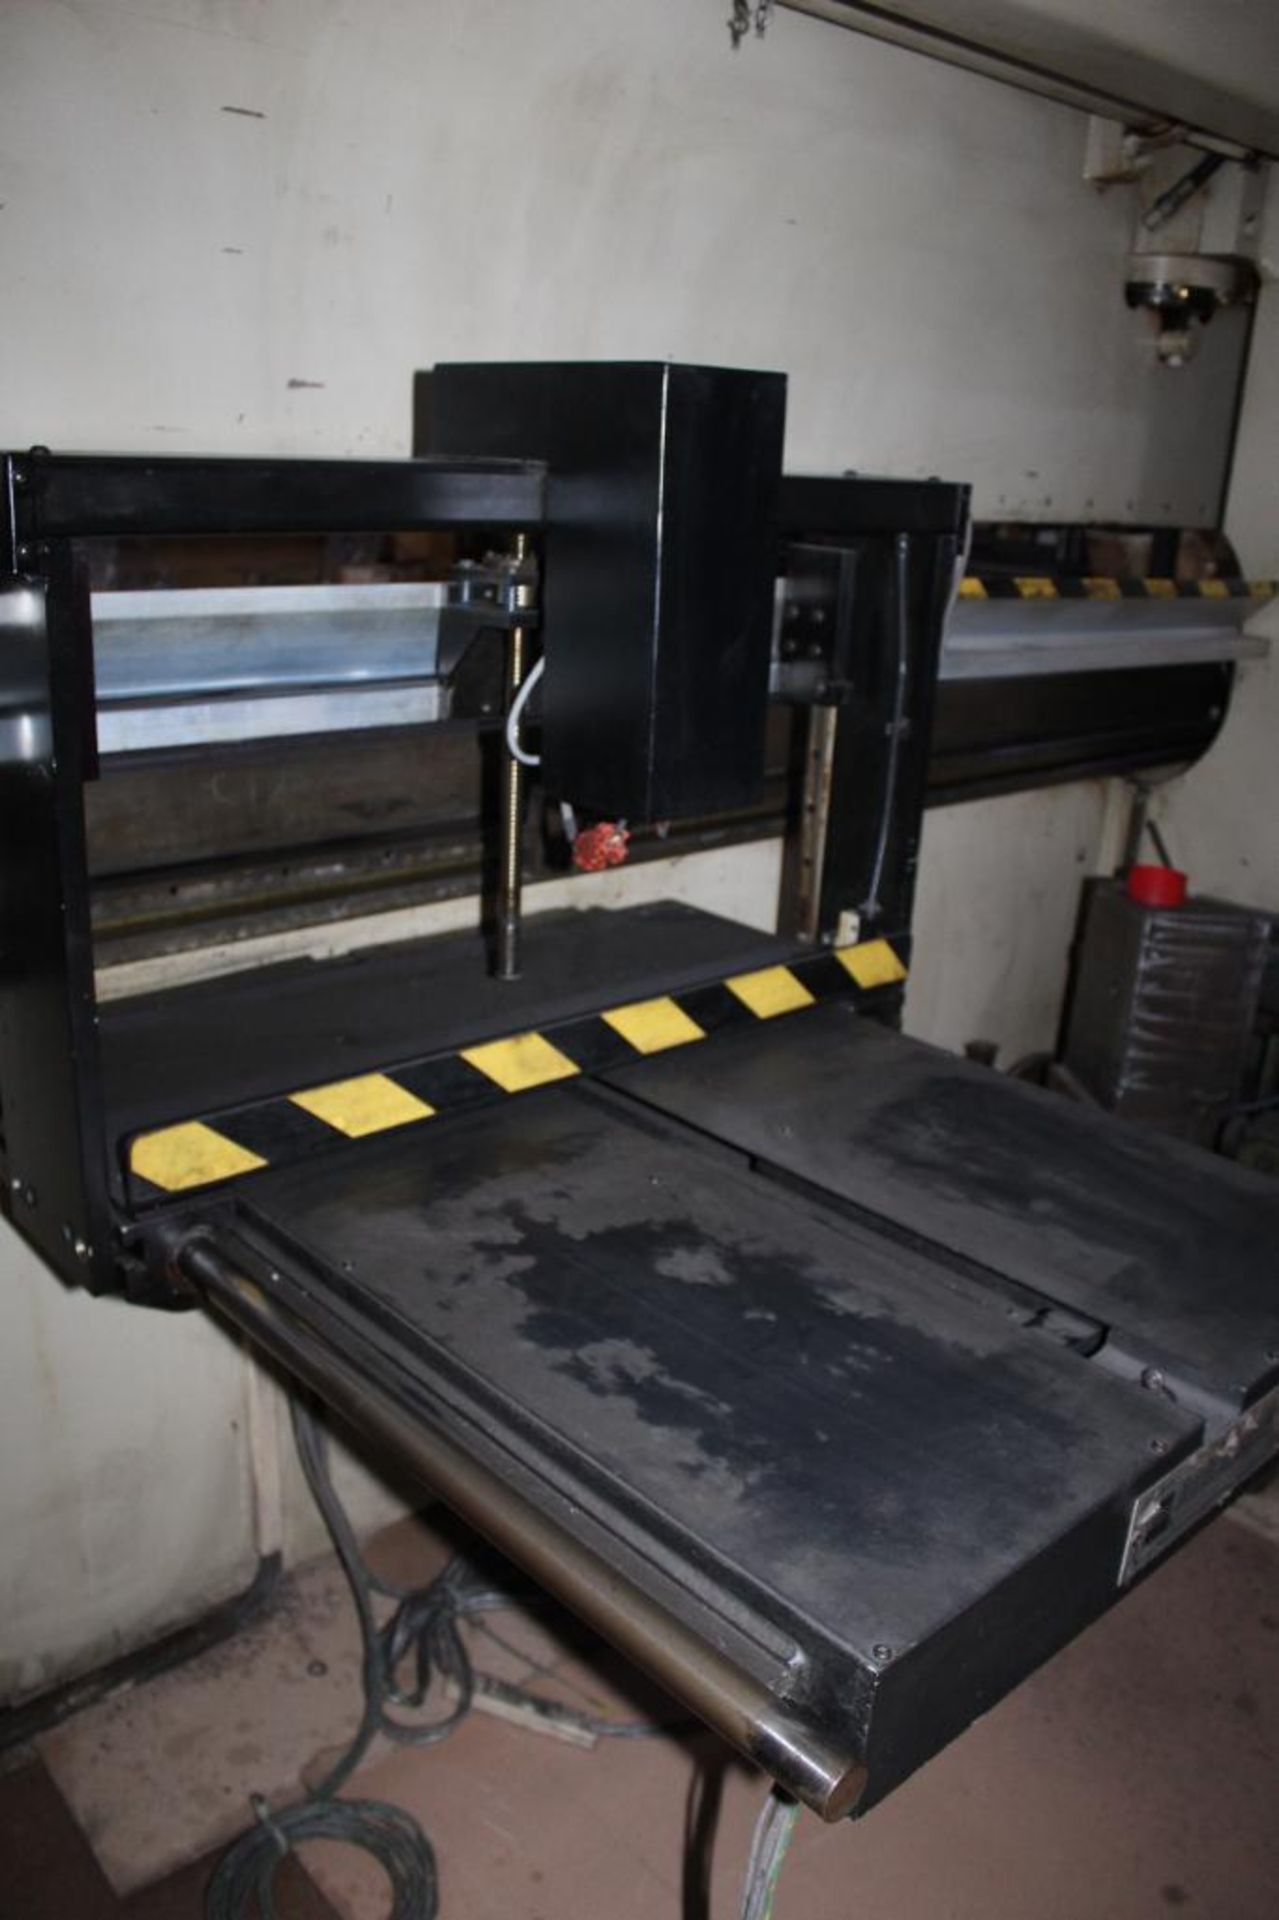 1995 LVD Hydraulic Press Brake Model 180JS13 Equipped With Hurco AutoBend 7 CNC Back Gage - Image 10 of 22